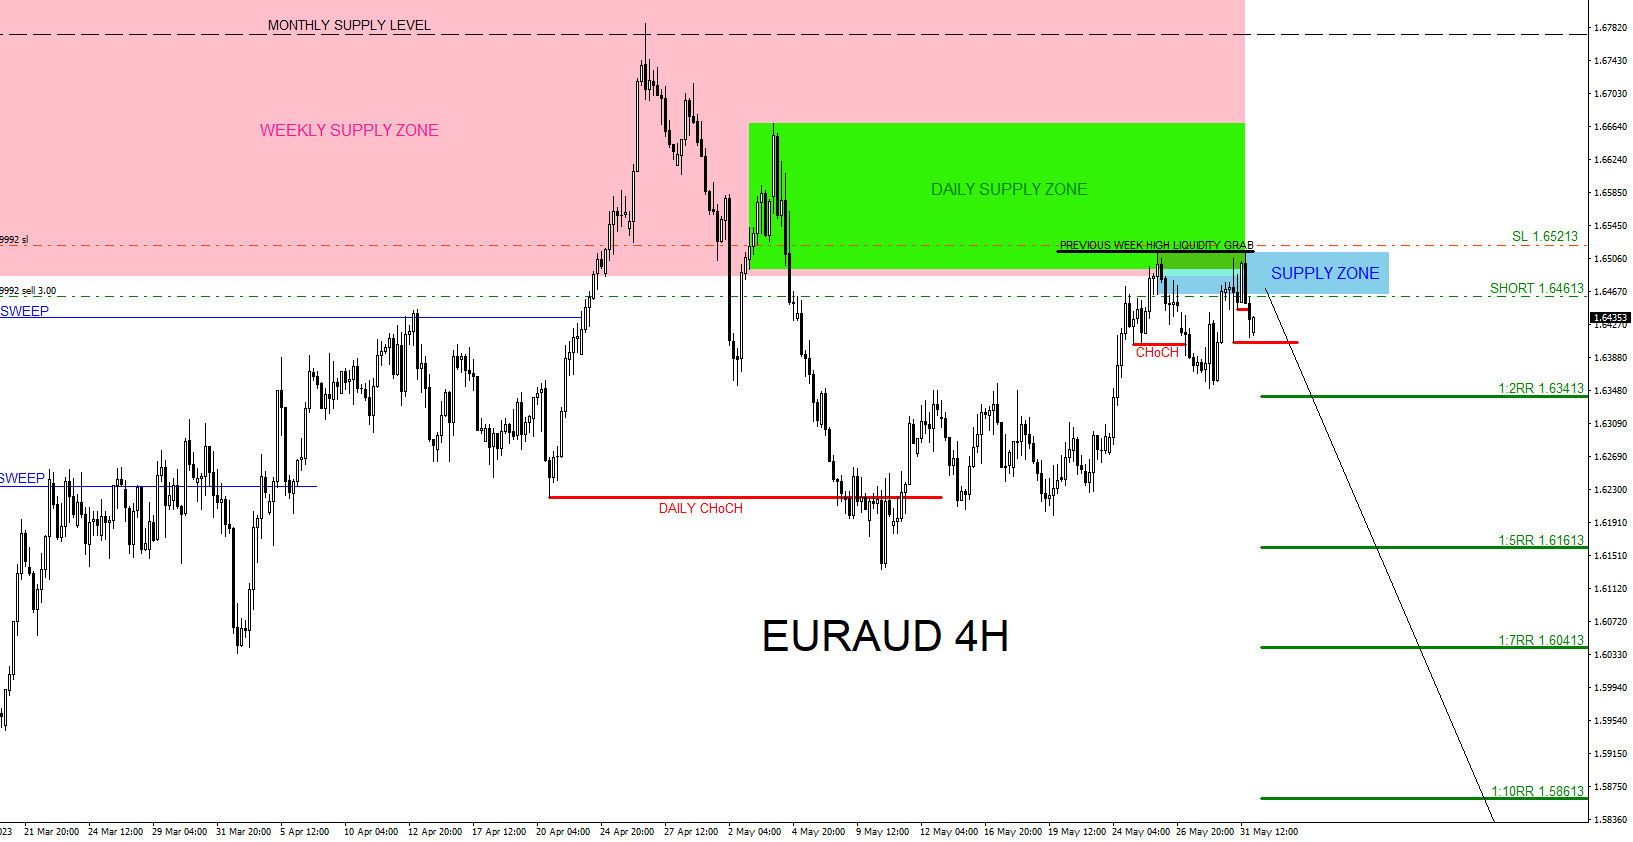 EURAUD : Catching the 420 Pip 1:7 Risk/Reward Move Lower